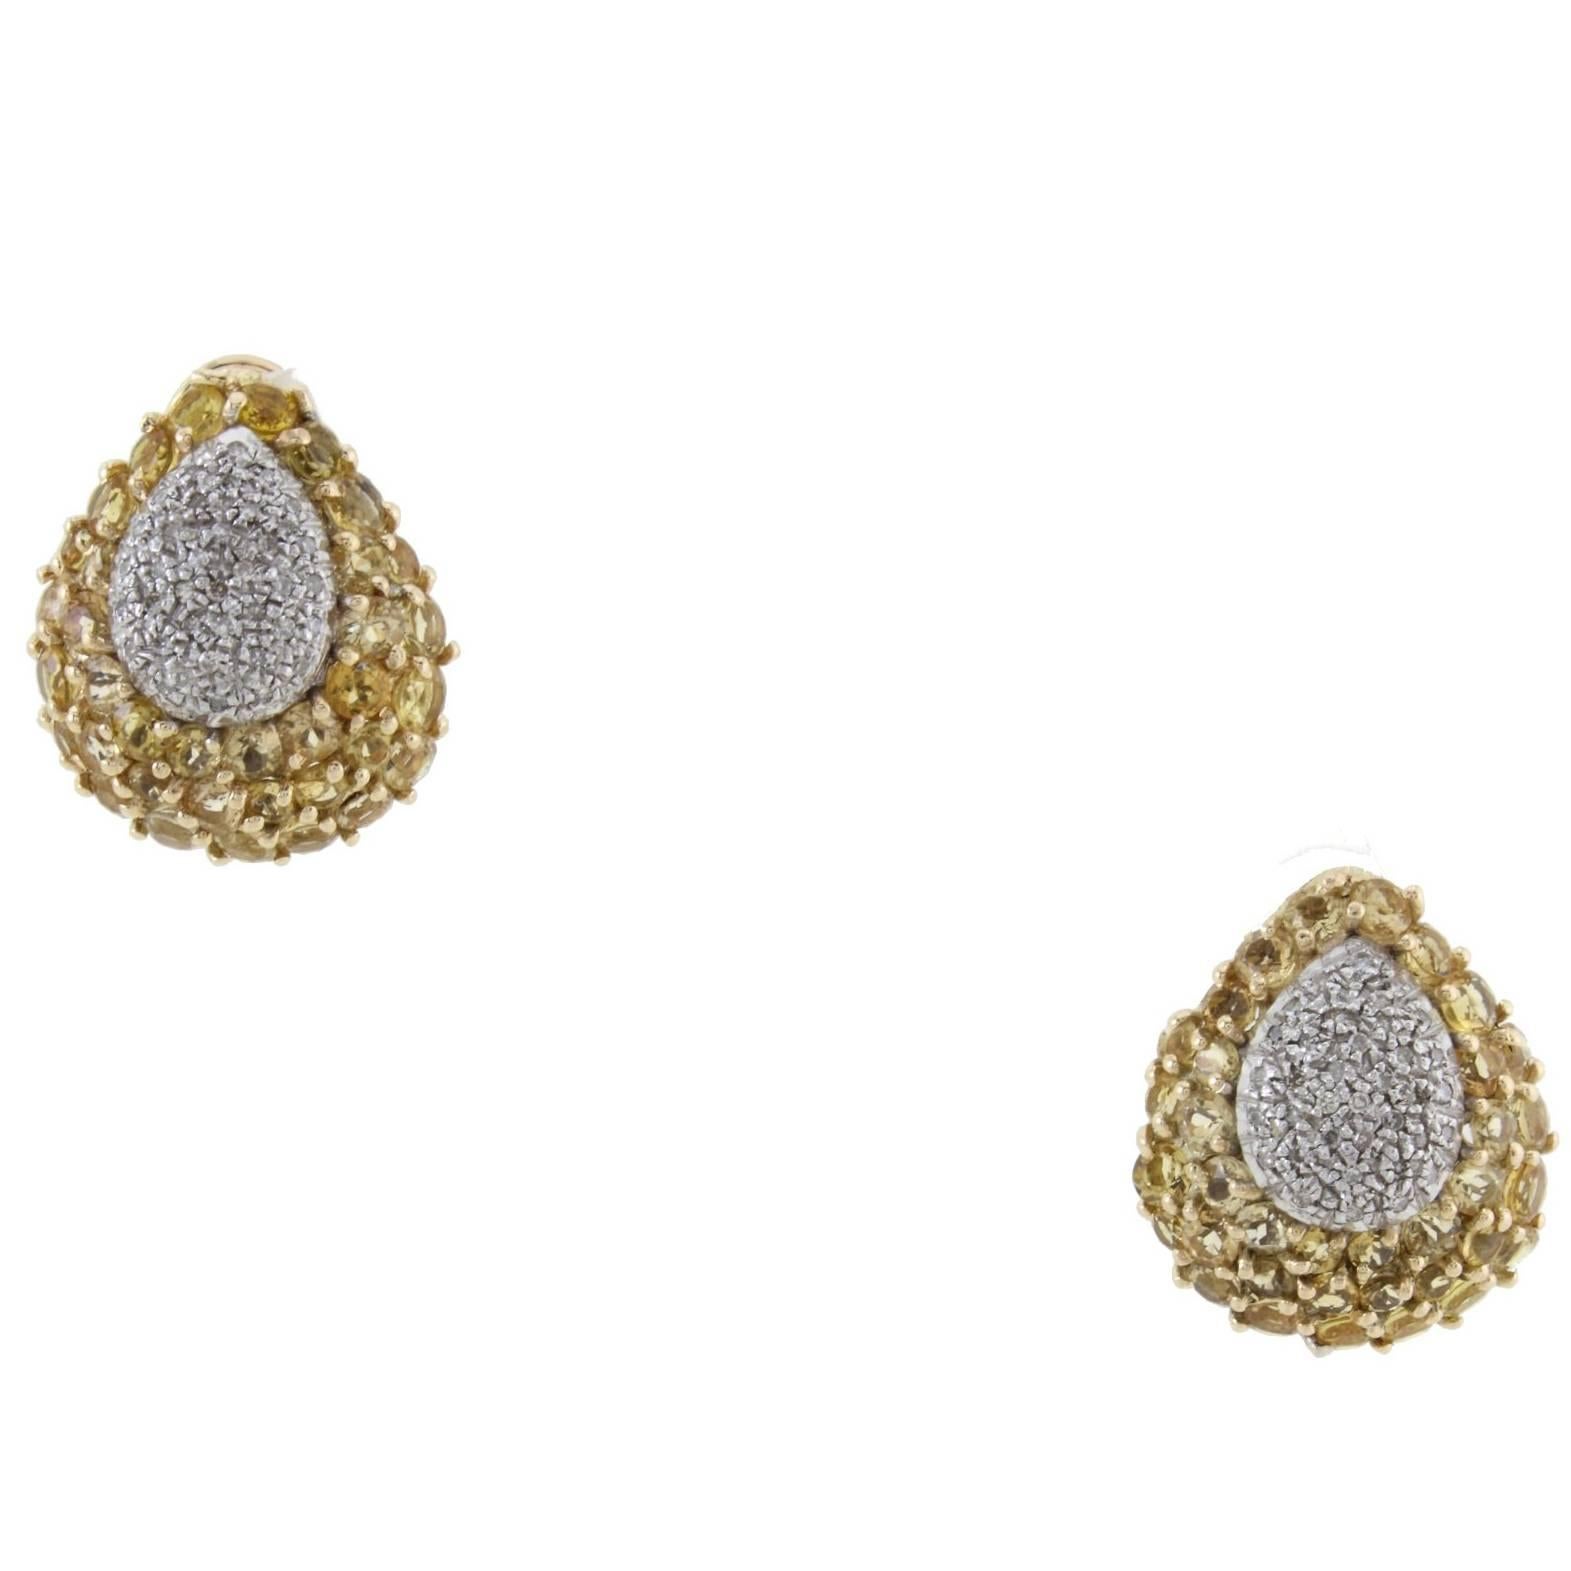 Clip-on earrings in 14k yellow and white gold mounted with 2 diamonds drops and 2 yellow topaz drops.
Diamonds 0.62 kt
Topaz 8.30 kt 
Tot.Weight 19.00 gr
R.F ufei 